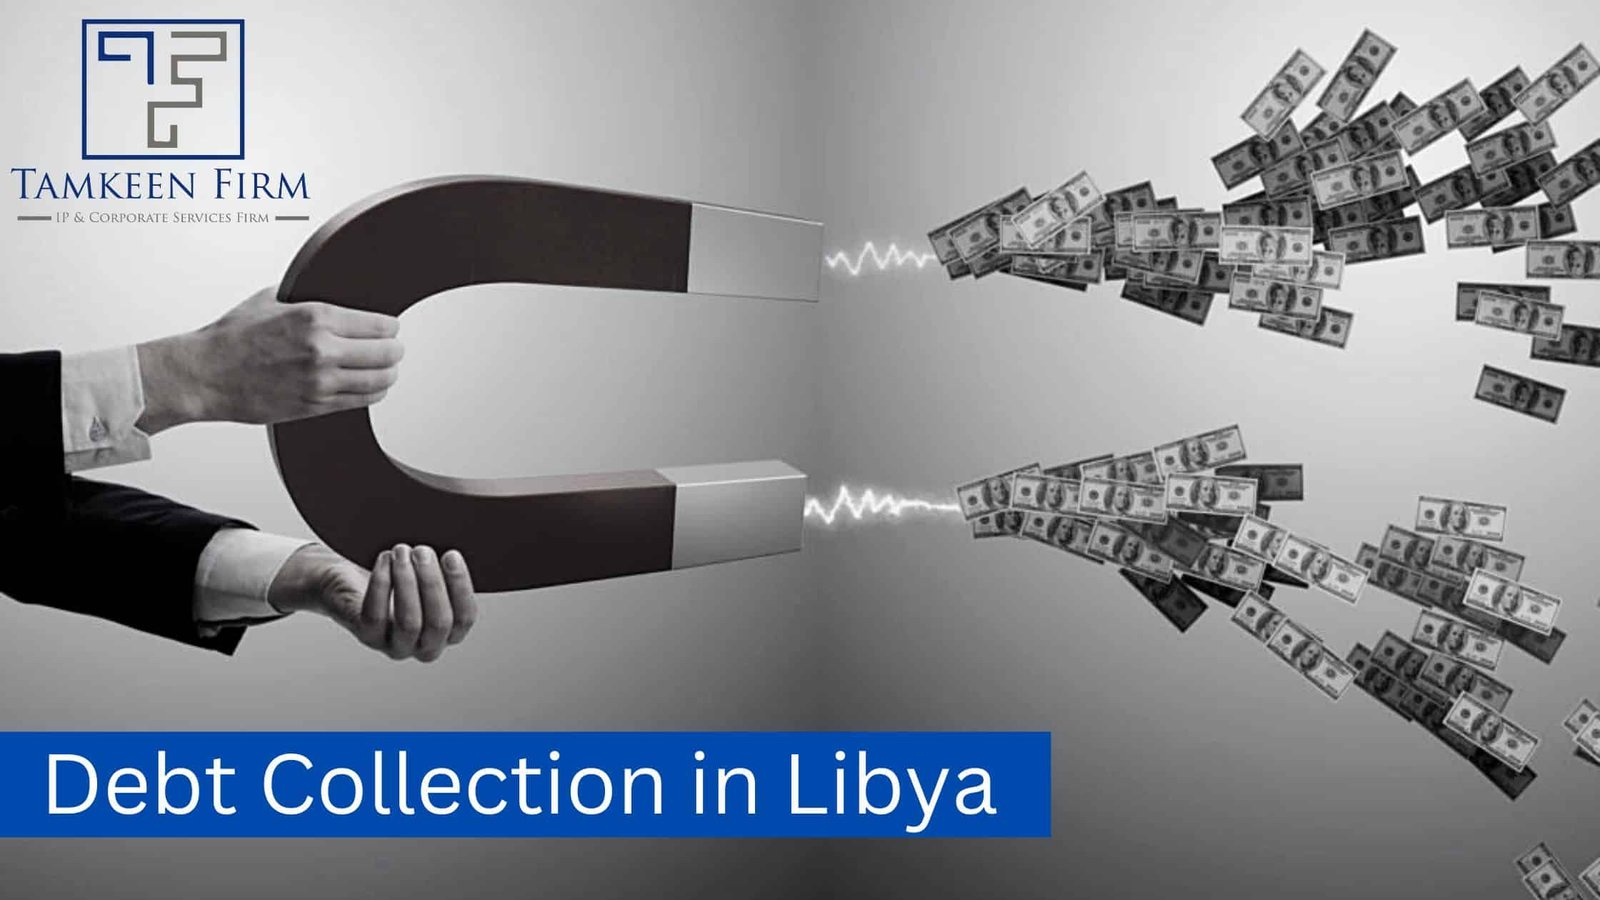 Expert Debt Collection Services in Libya: Recover Your Debts With Tamkeen Firm